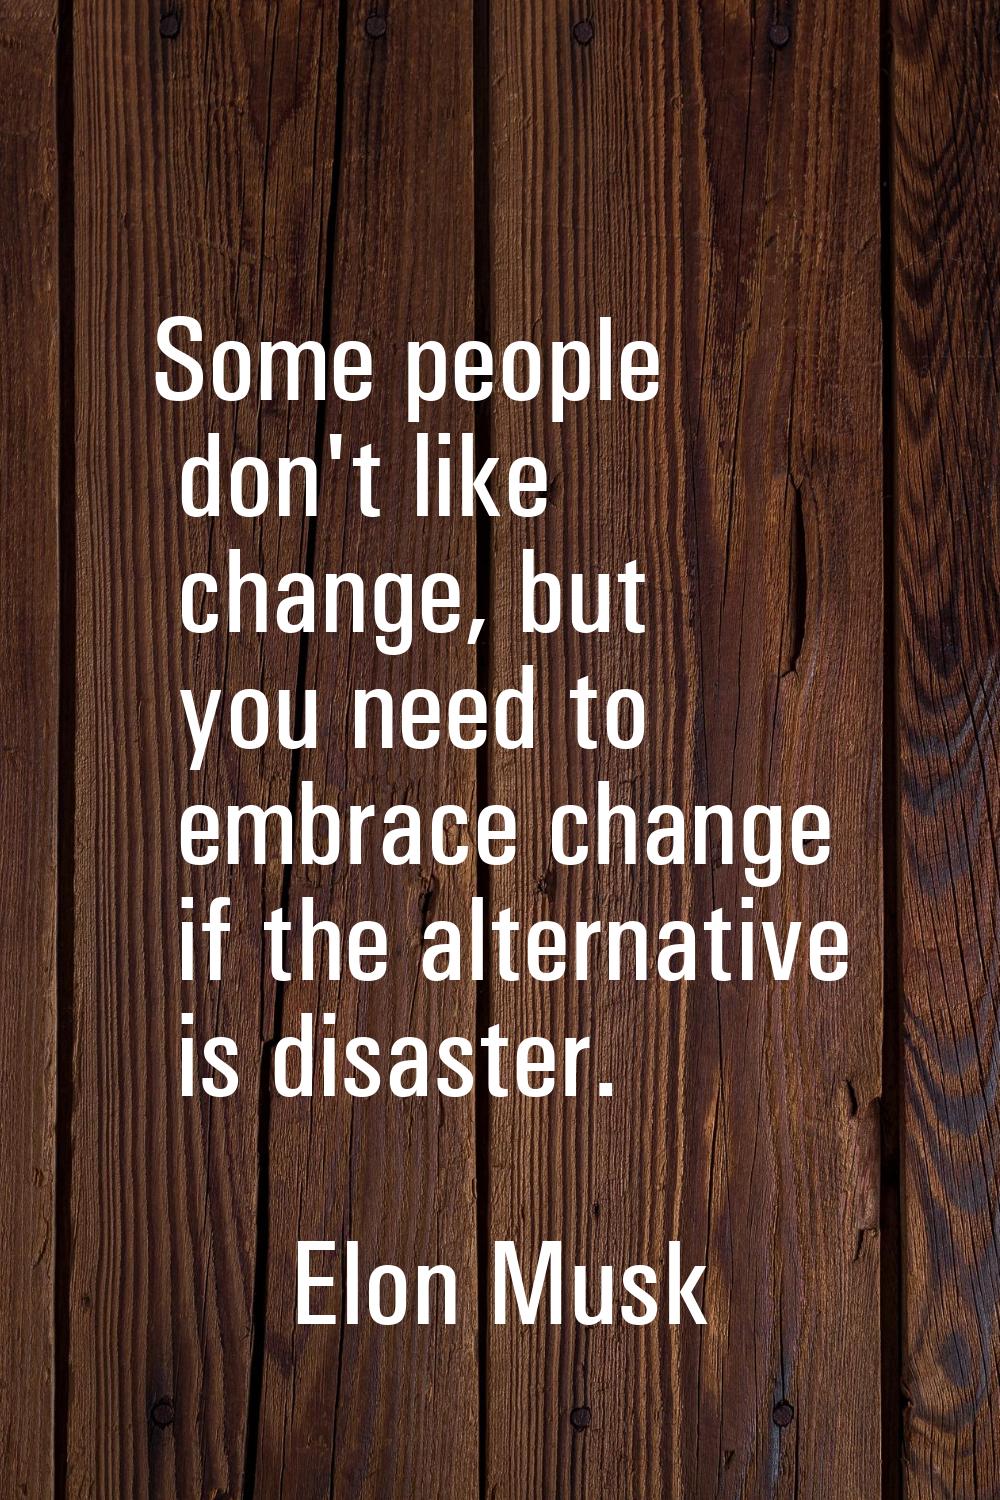 Some people don't like change, but you need to embrace change if the alternative is disaster.